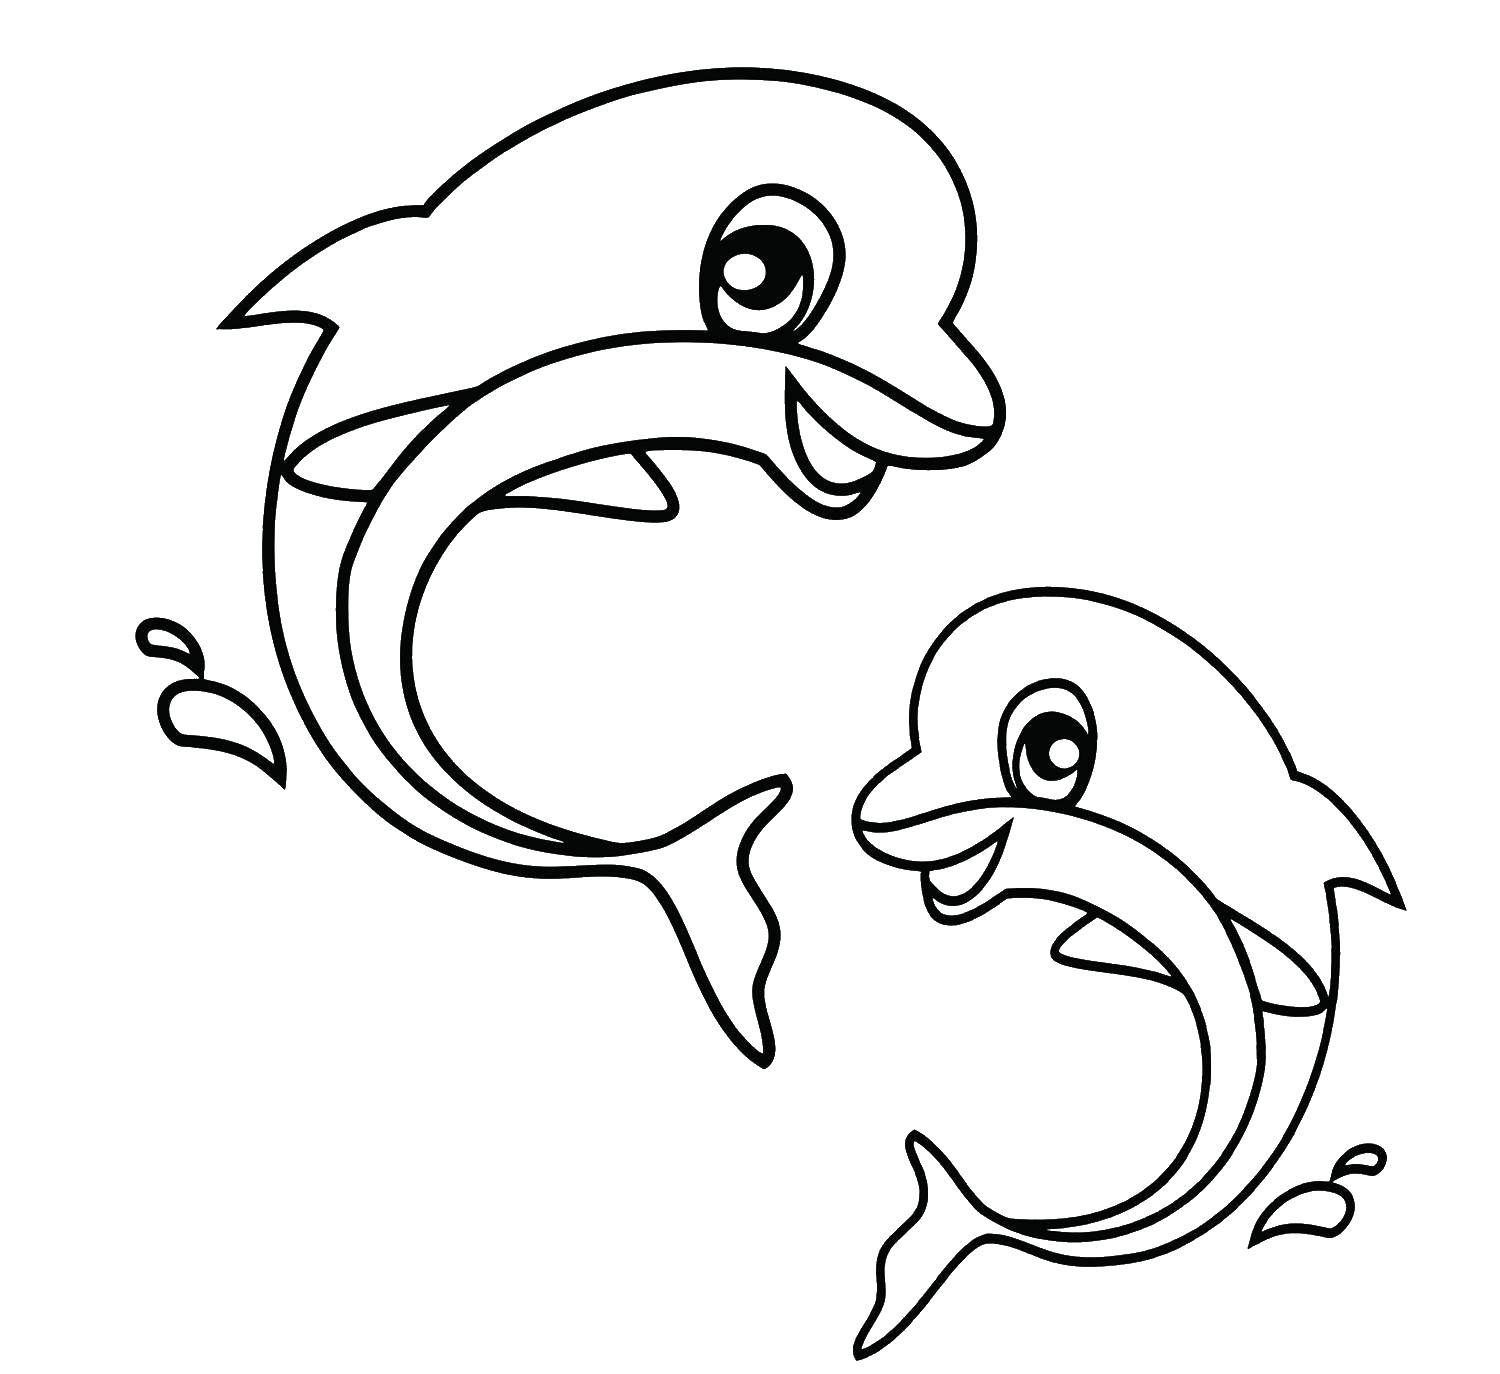 Coloring The dolphins. Category animals. Tags:  animals, dolphins, fish.